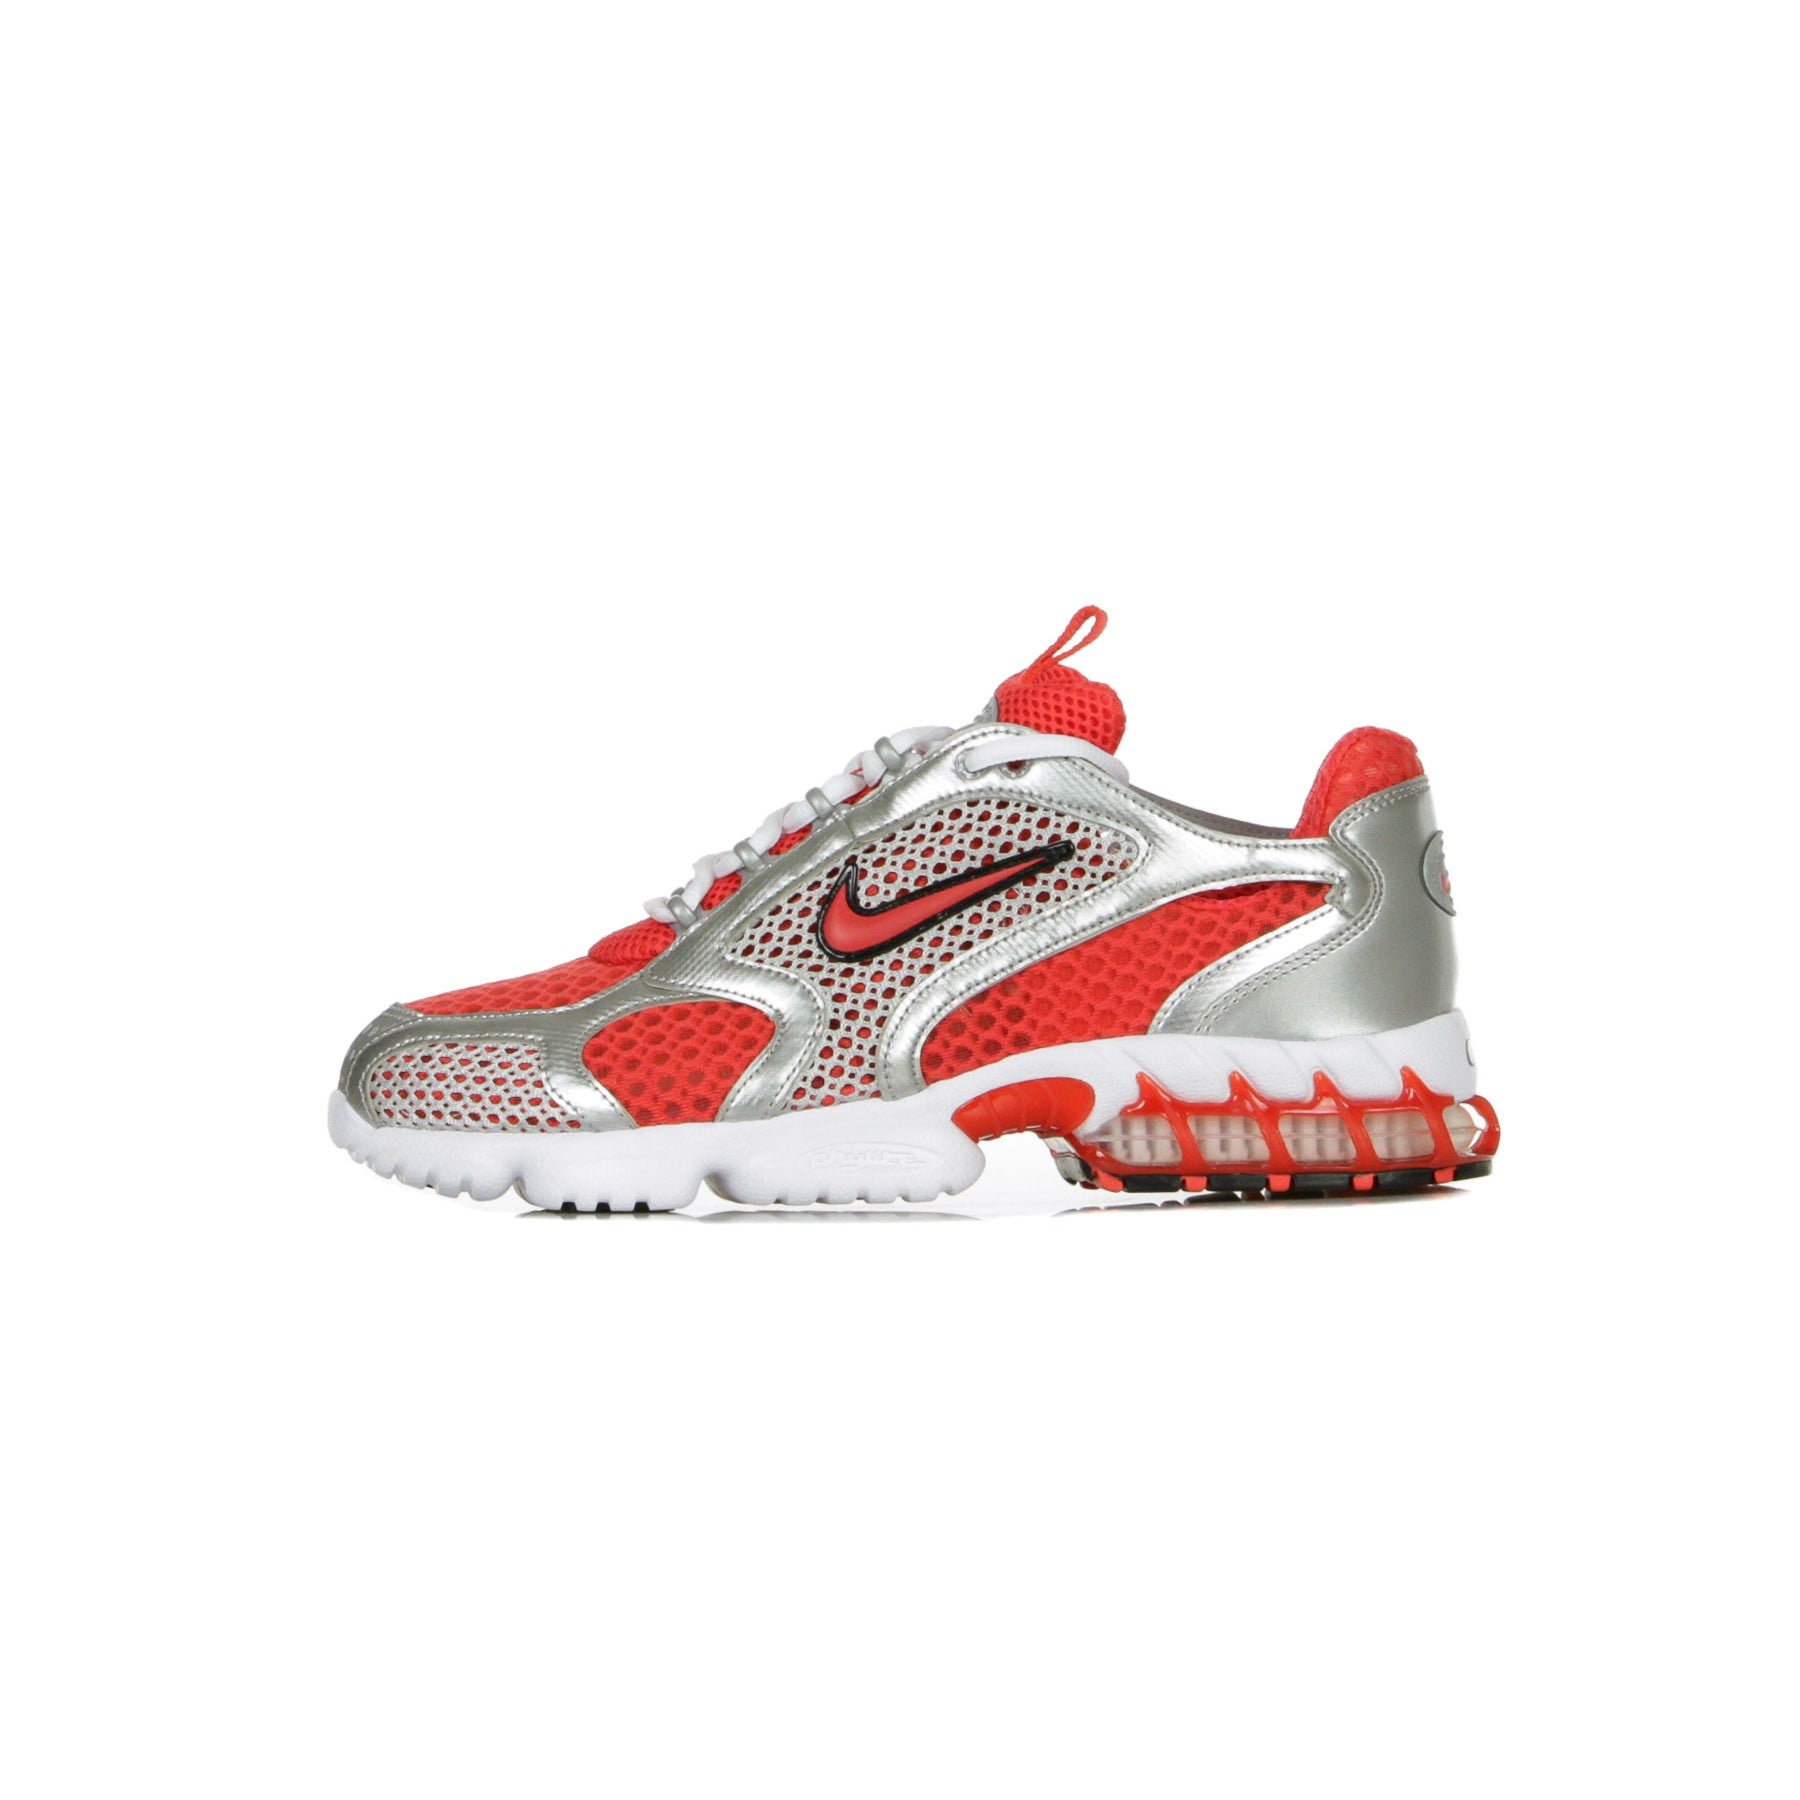 Air Zoom Spiridon Cage 2 Track Red/track Red/white Men's Low Shoe